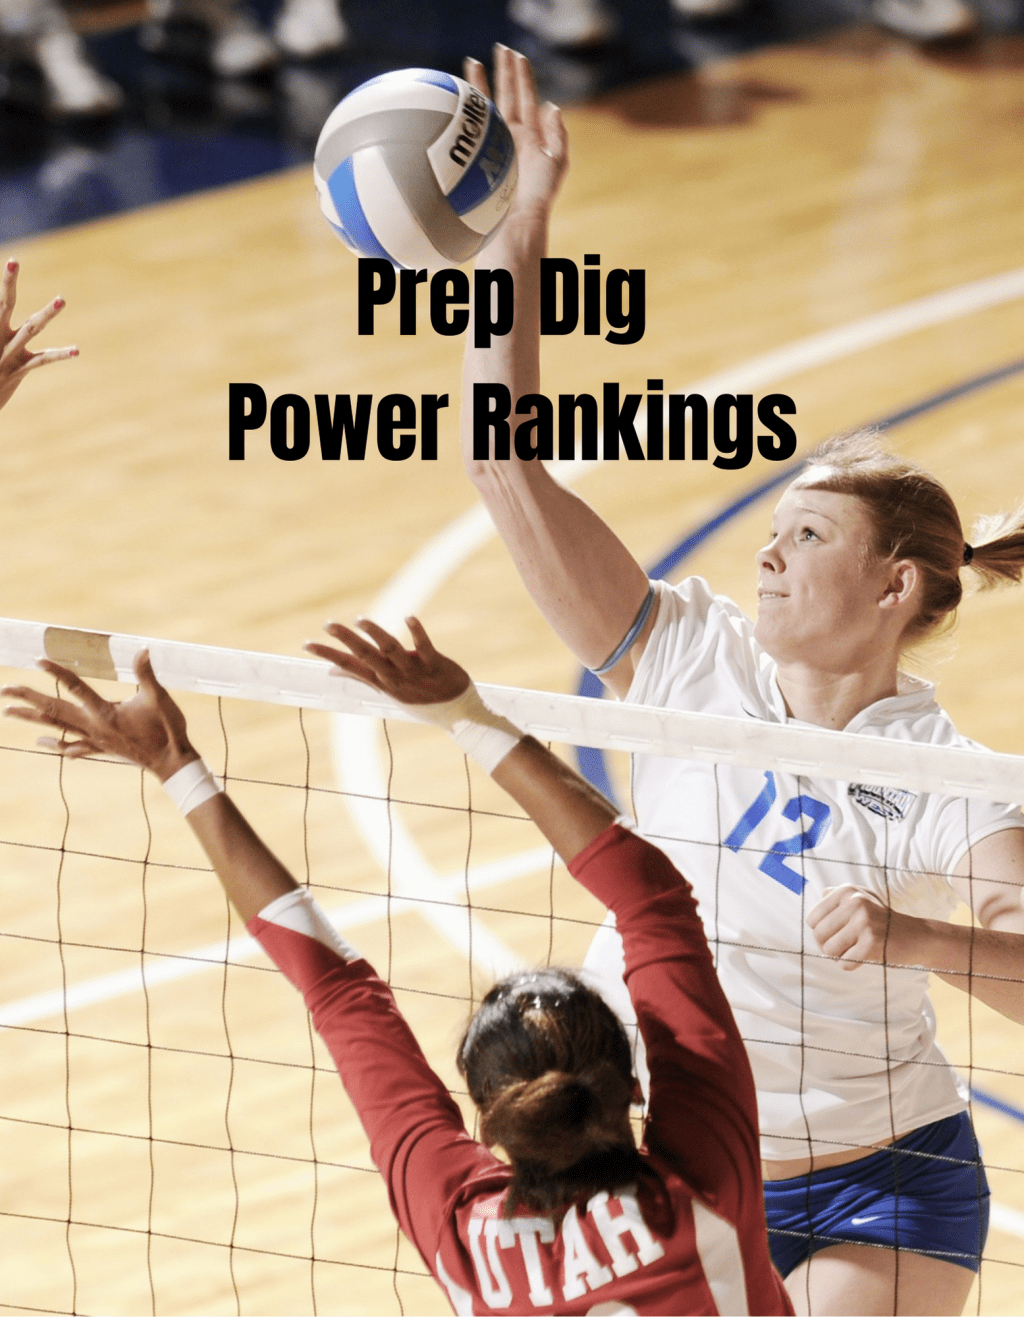 The 10 Remain the Same: Prep Dig Power Rankings